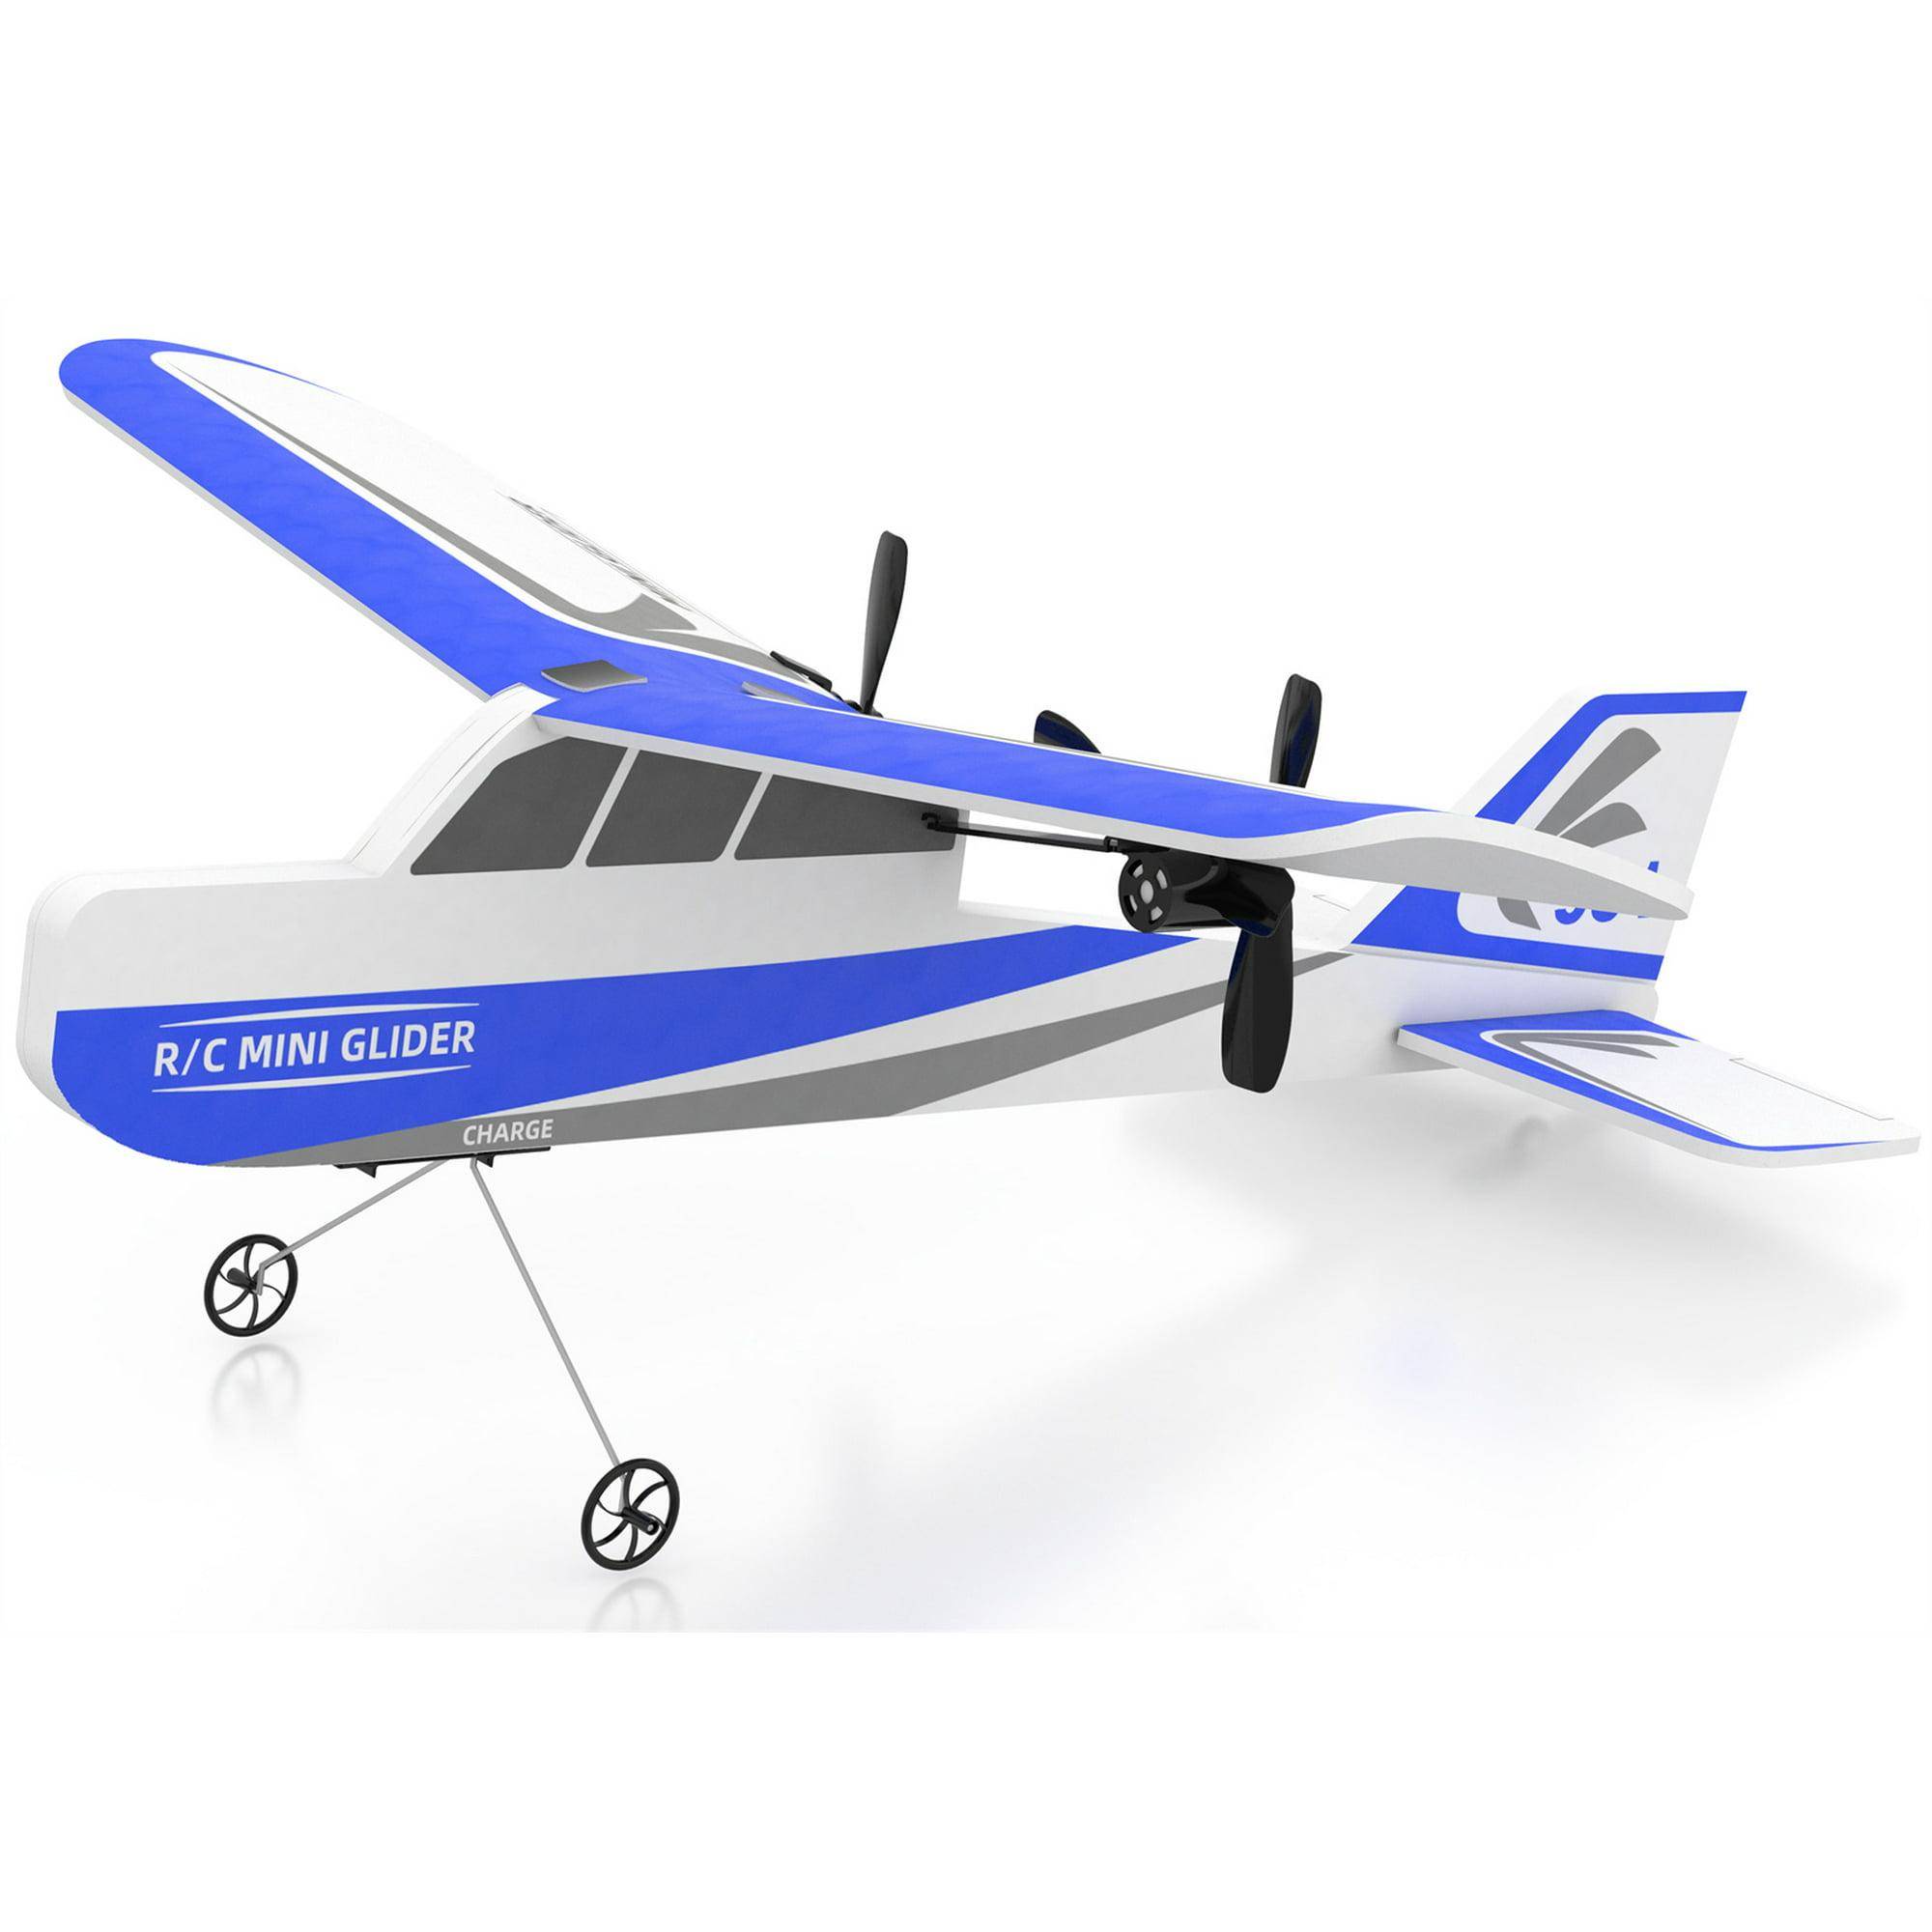 Rc Planes For Sale Near Me:  Join a community to improve your RC flying skills